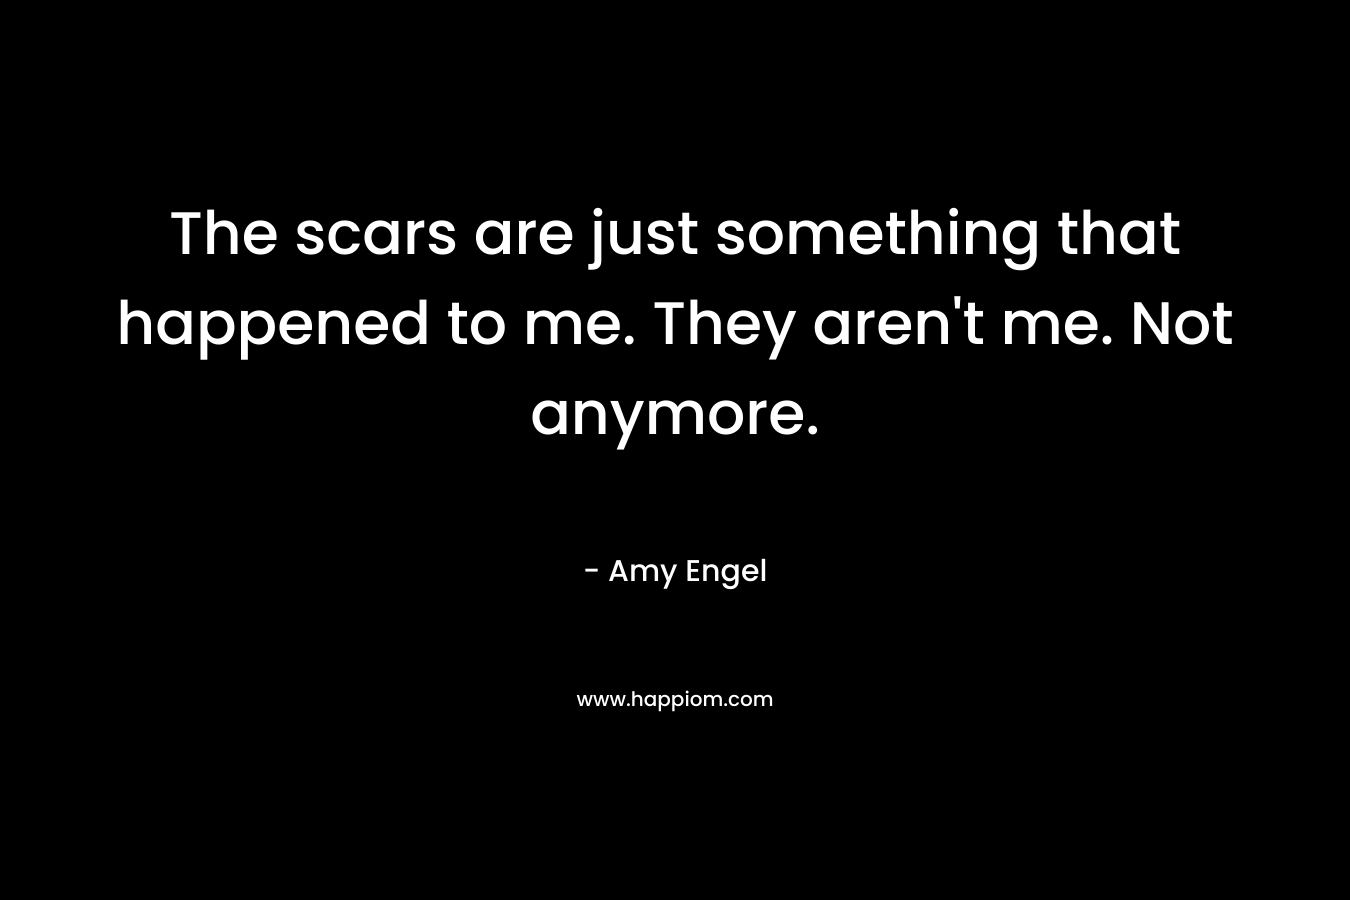 The scars are just something that happened to me. They aren’t me. Not anymore. – Amy Engel